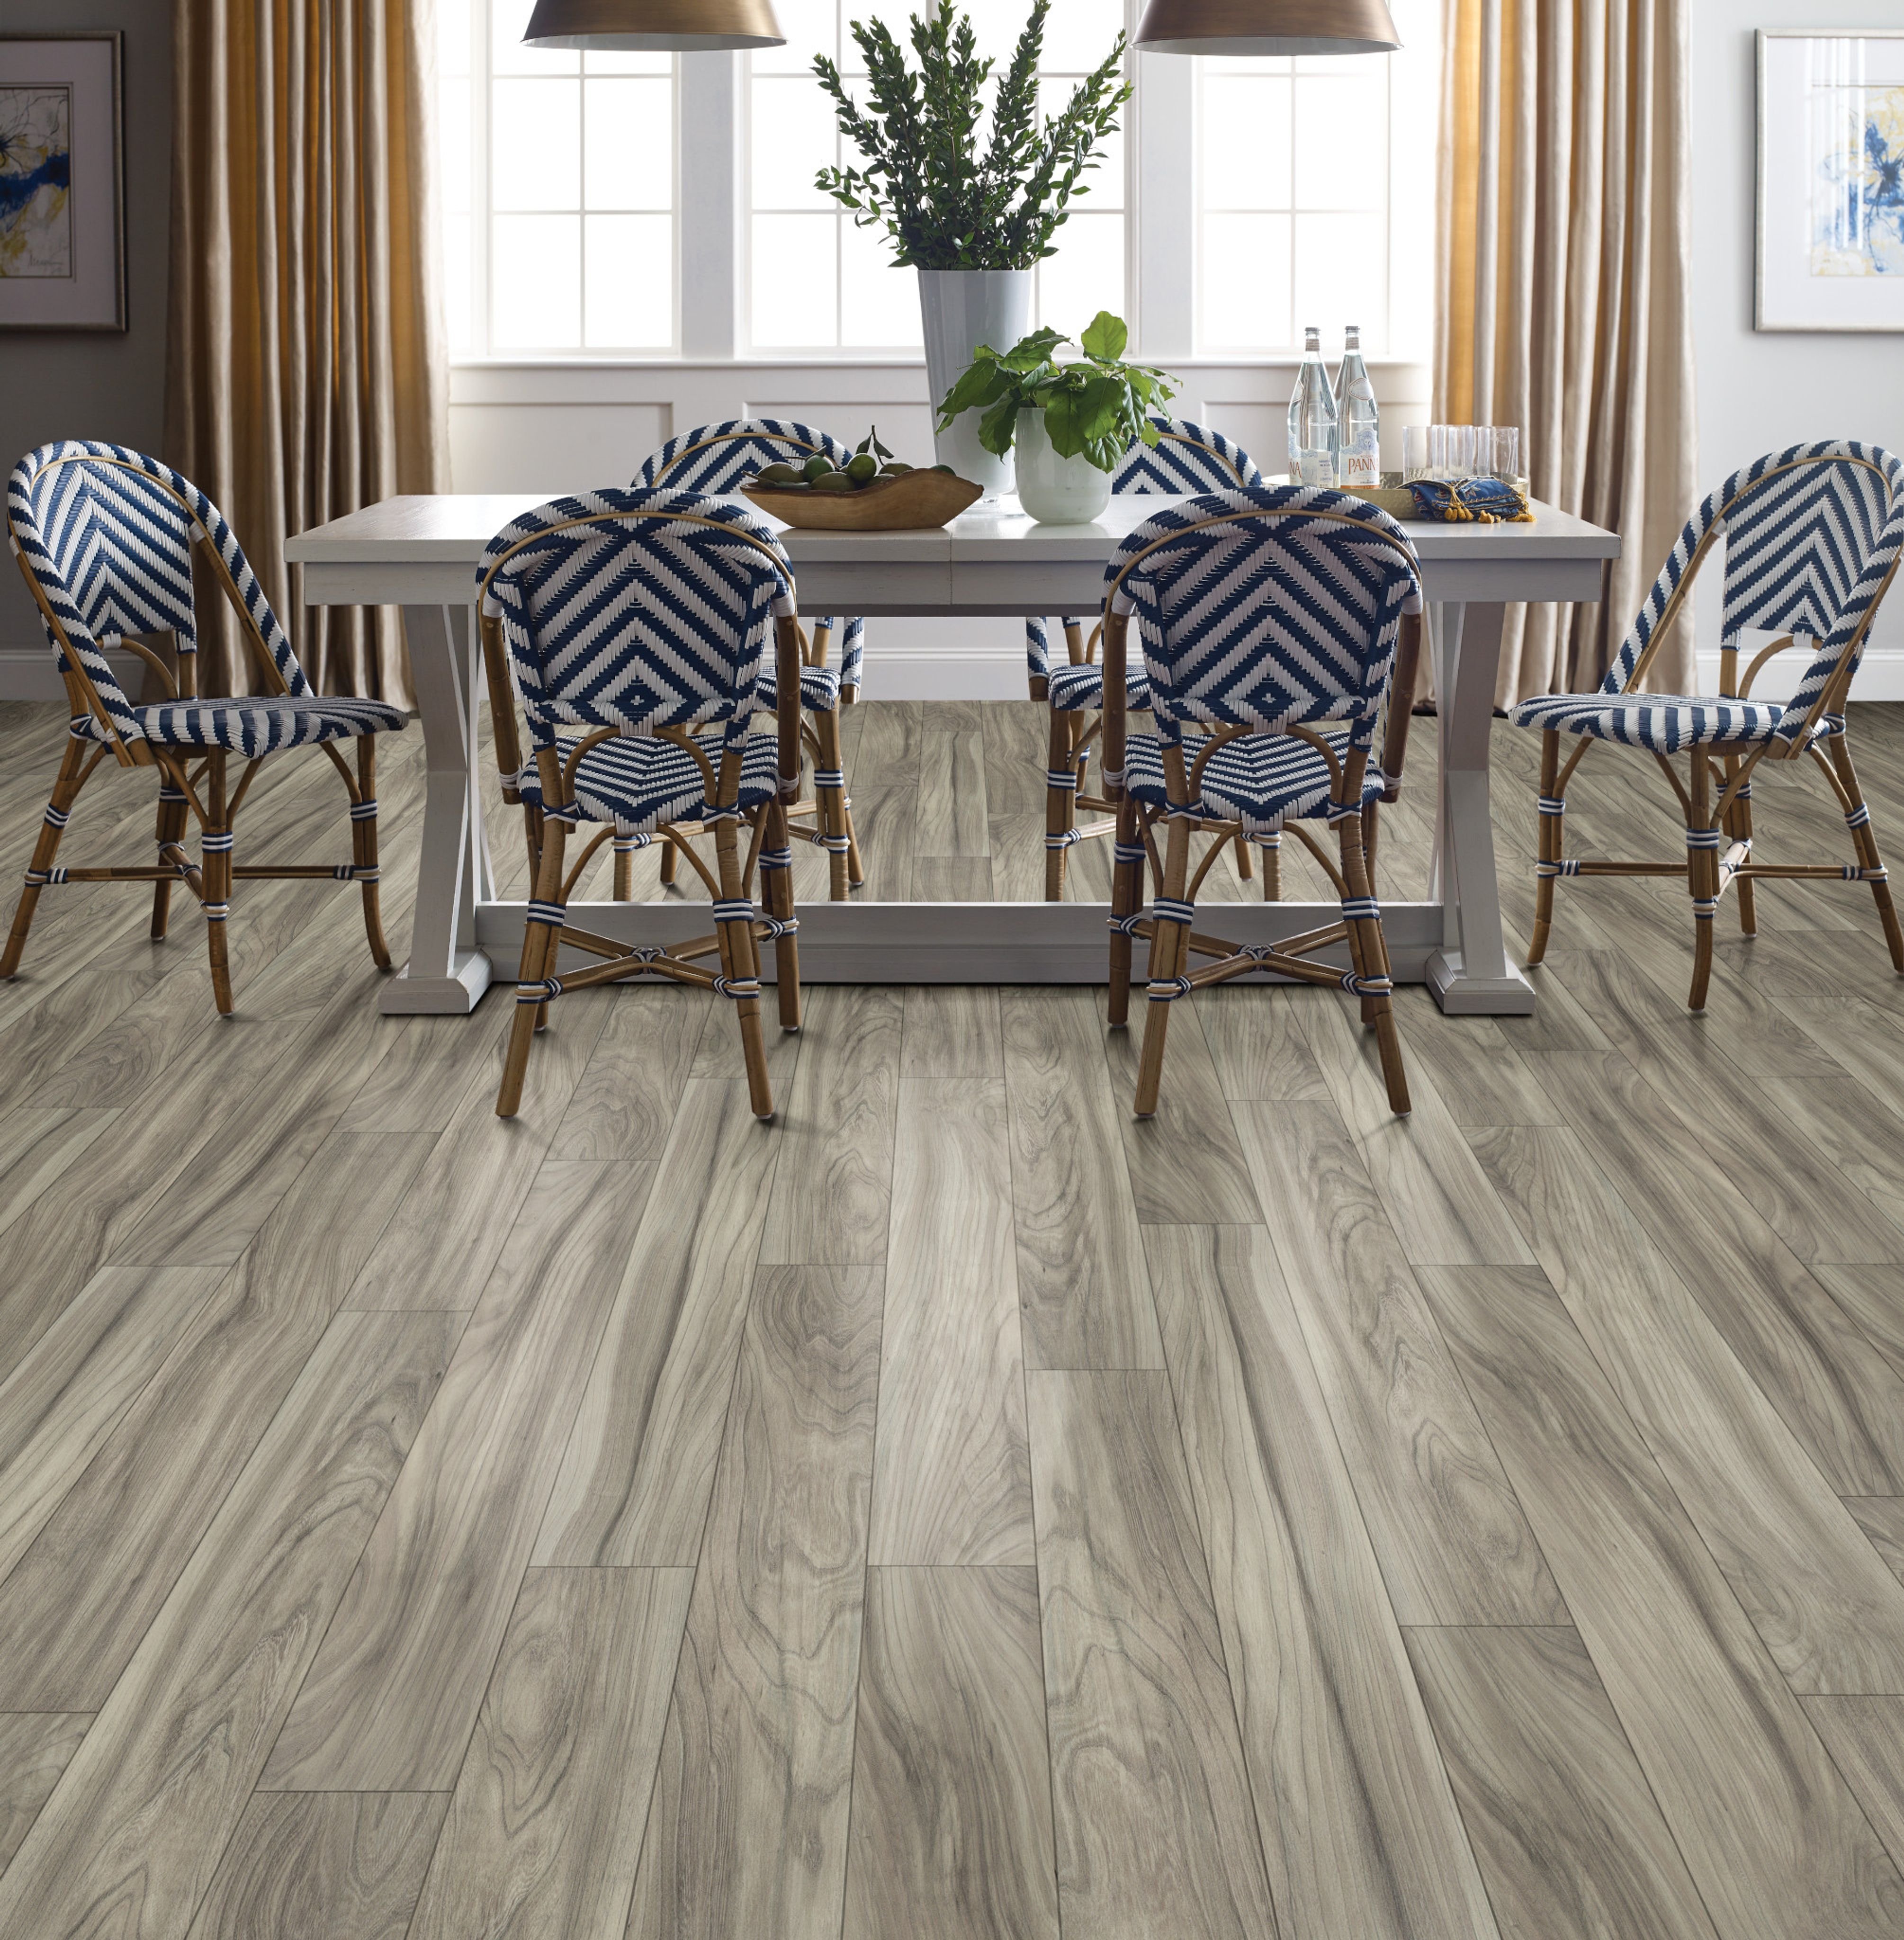 Dining room with wood-look laminate flooring from Capitol Carpet in Dalton, GA